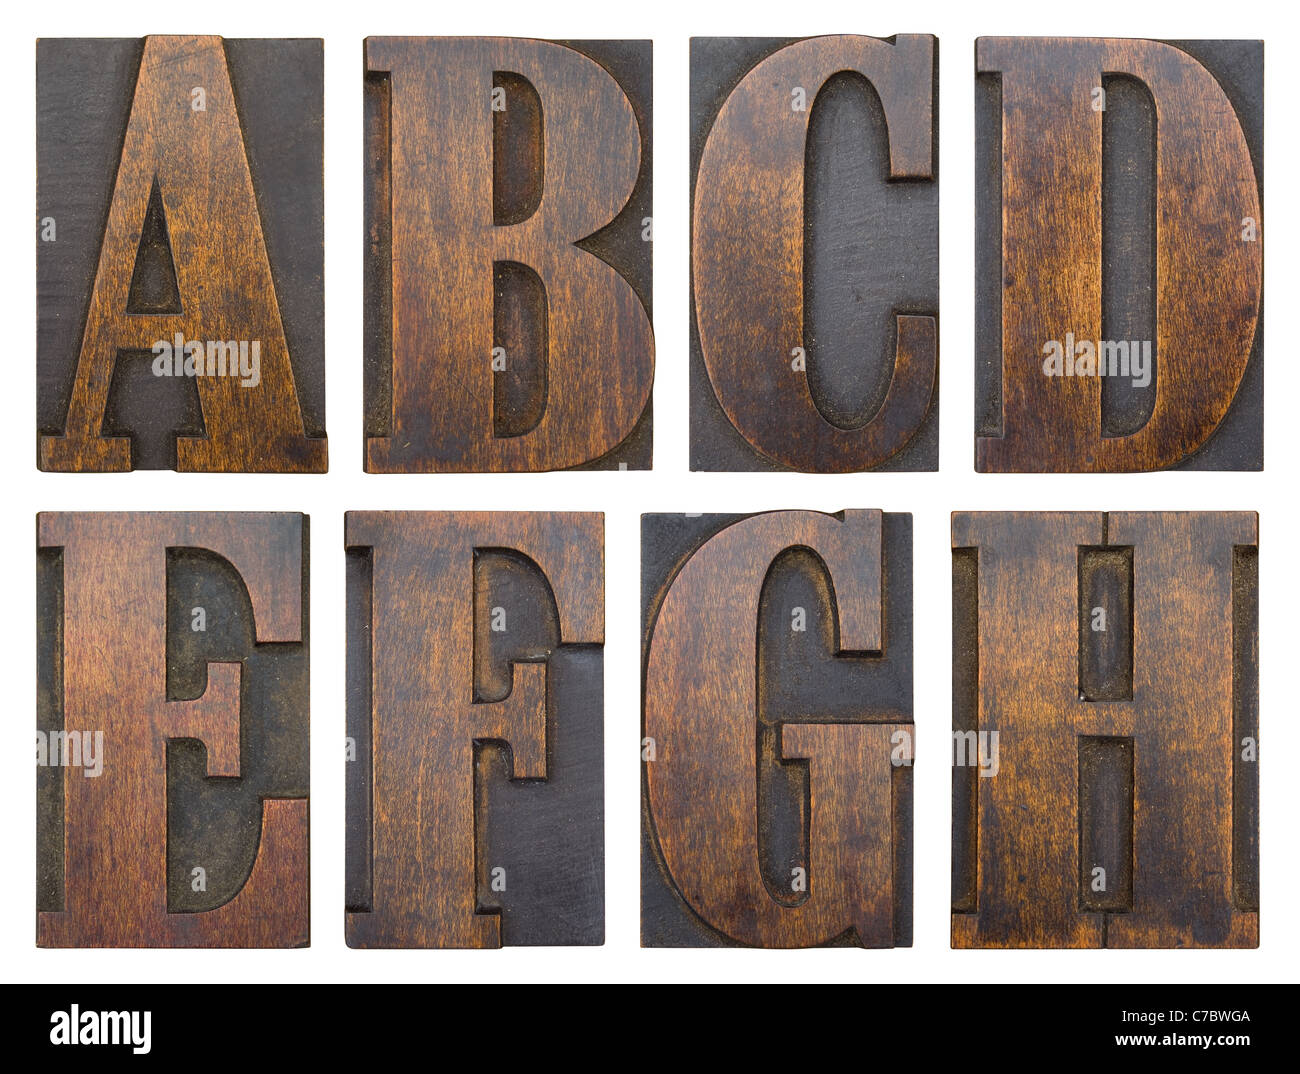 Part of an alphabet series in antique printer's woodblock letters. Please see my portfolio for the complete alphabet. Stock Photo